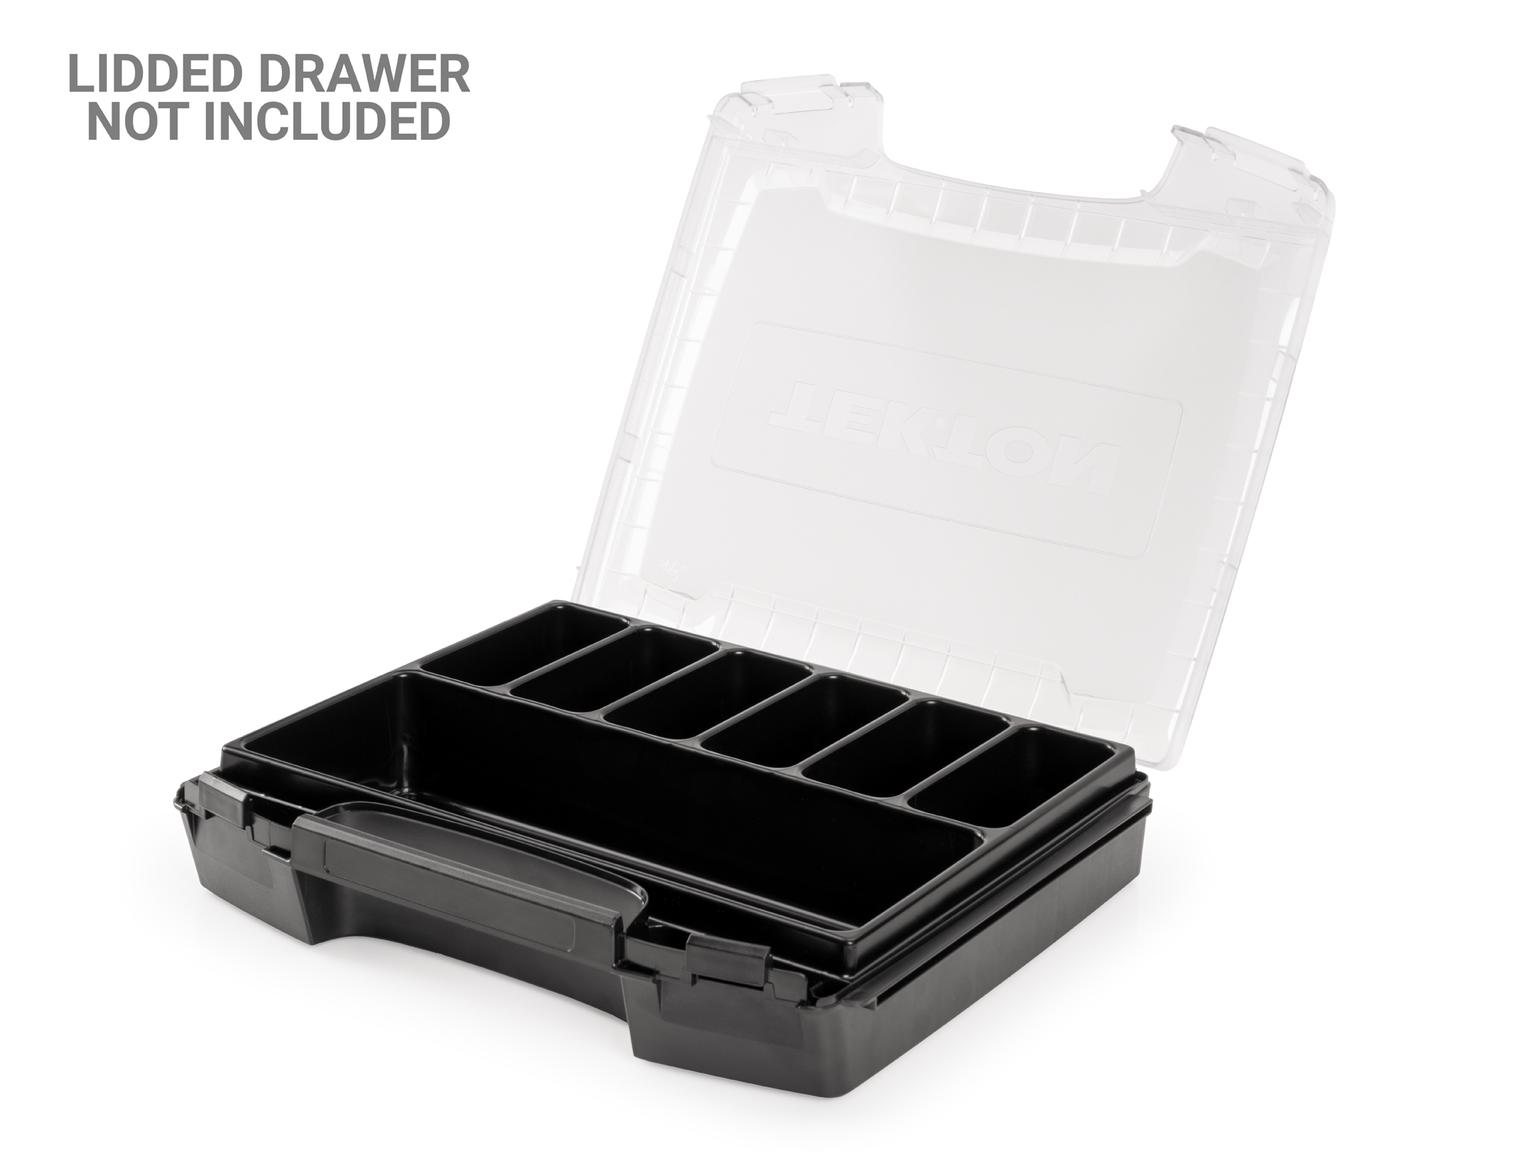 TEKTON OLB81307-T 7-Cavity Parts Tray for Lidded Drawer and Open Top Drawer